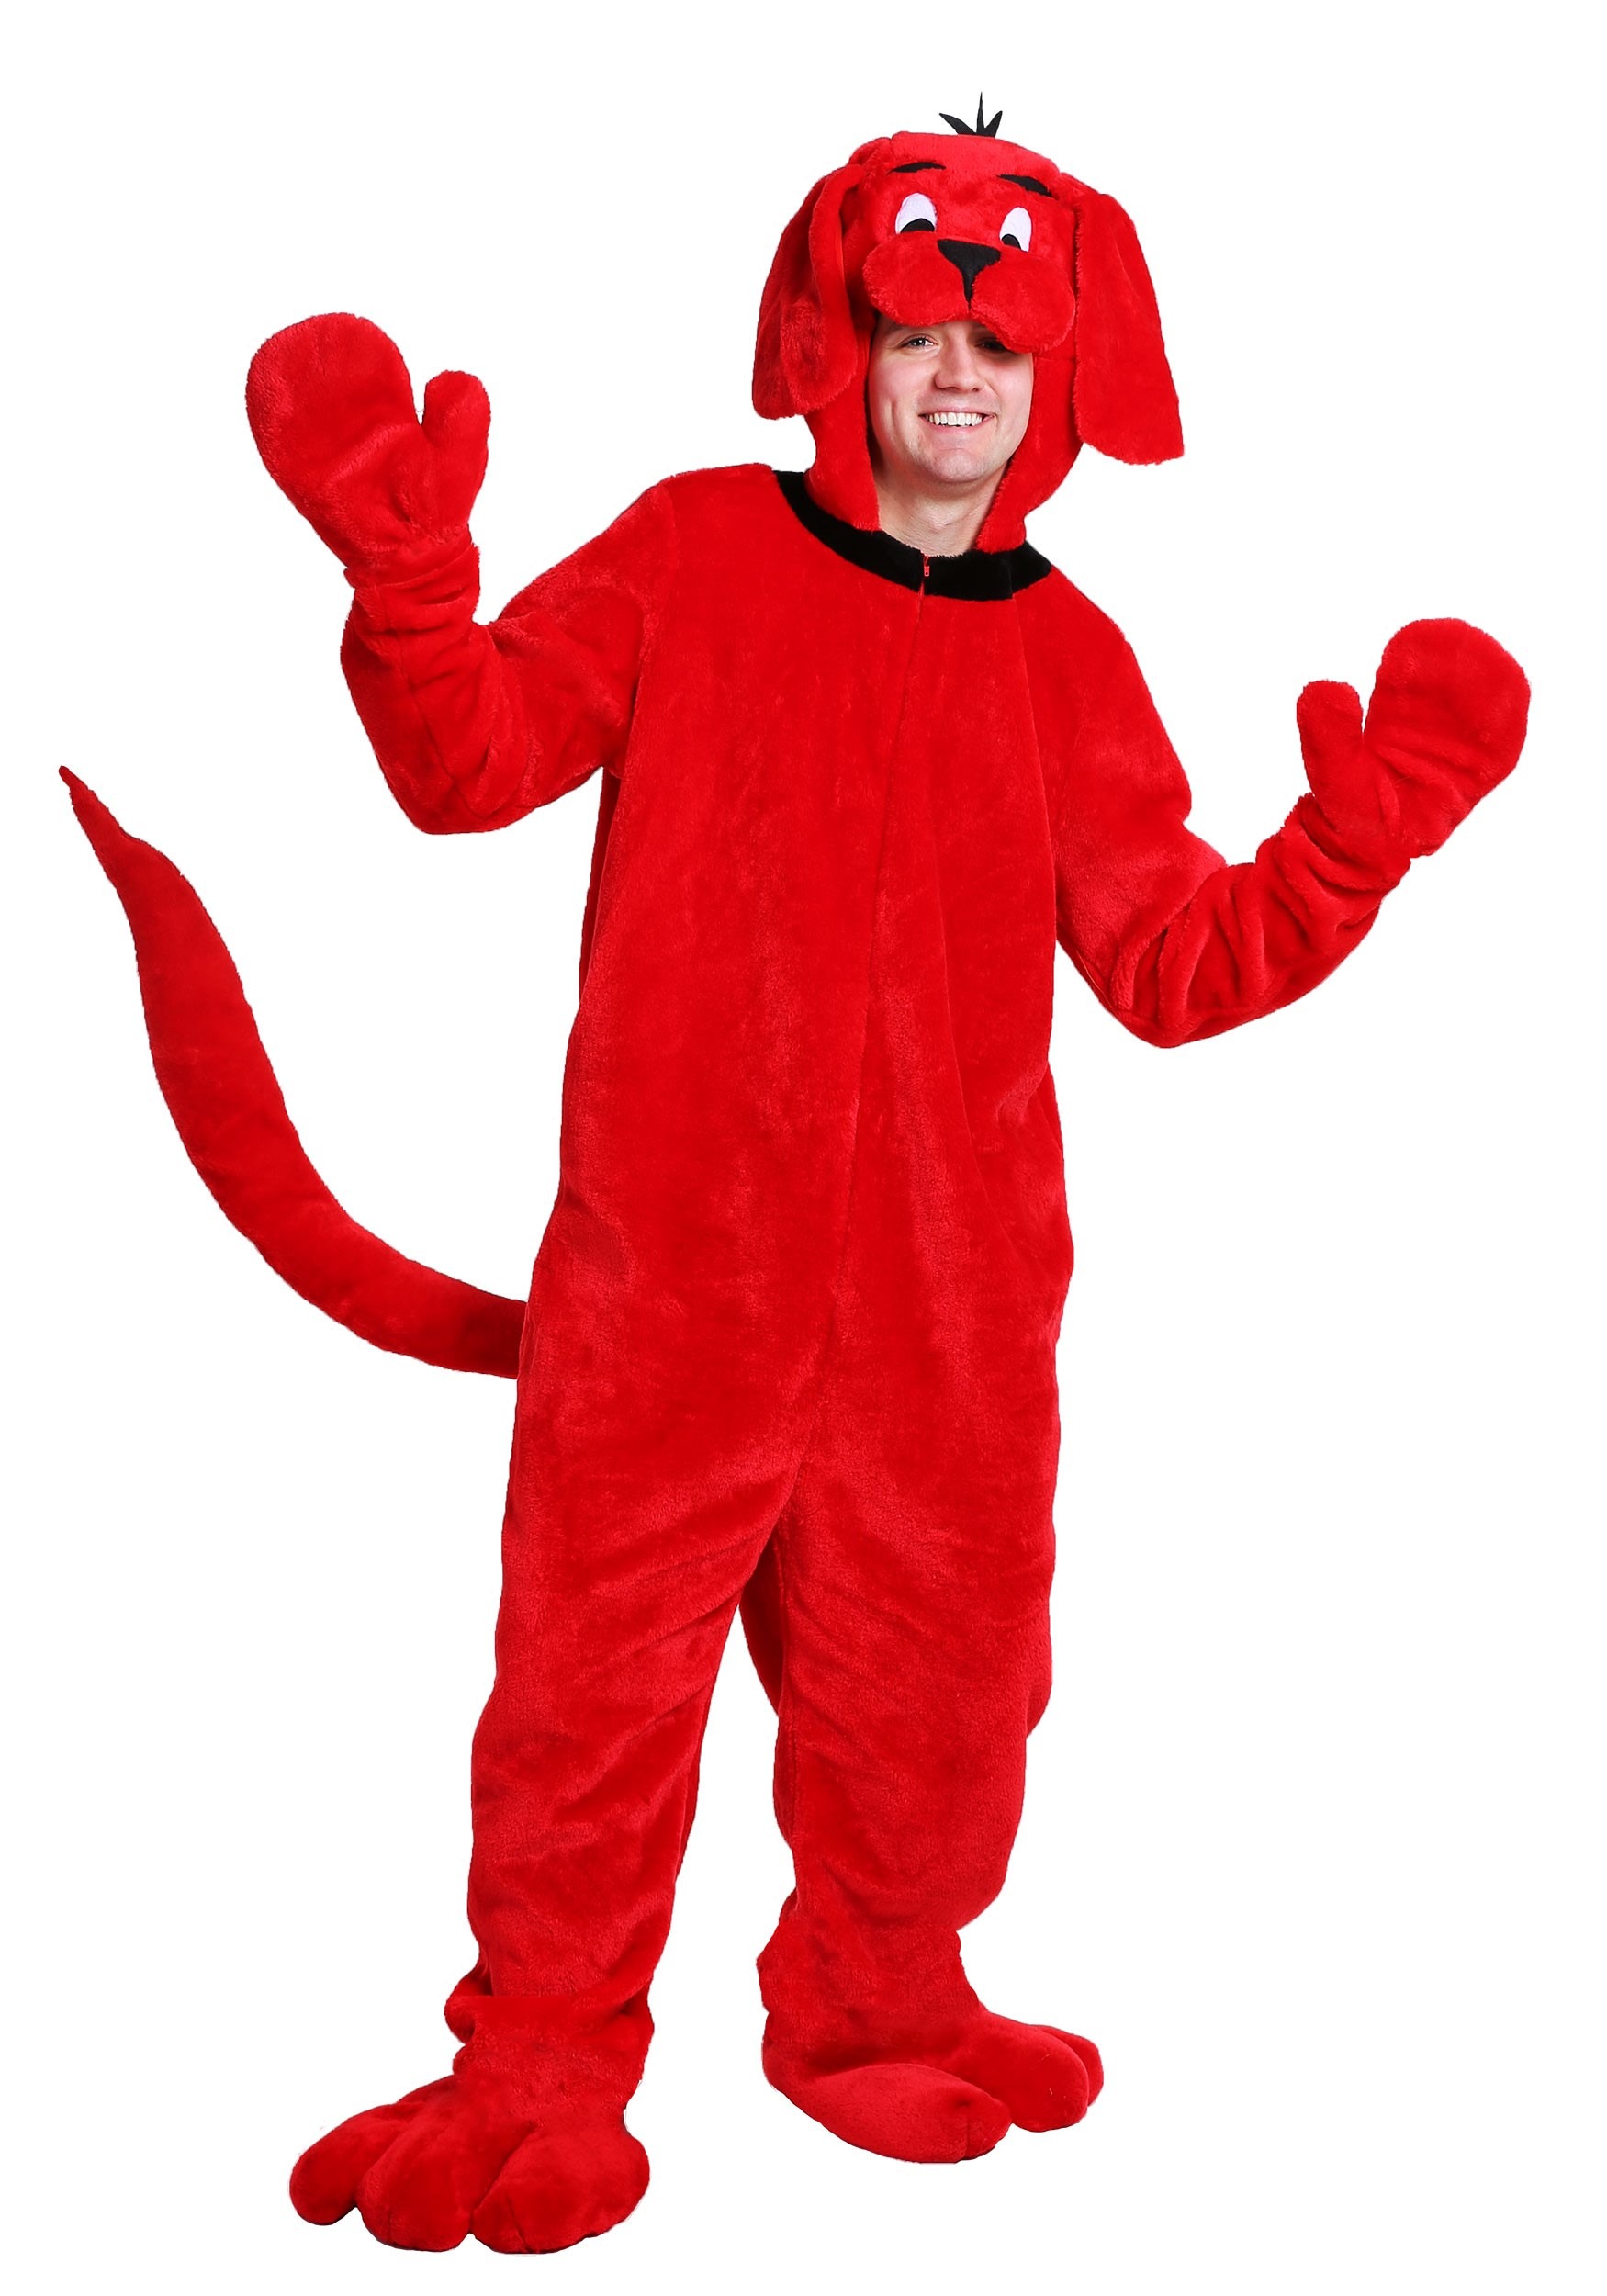 Clifford the Big Red Dog Adult Costume